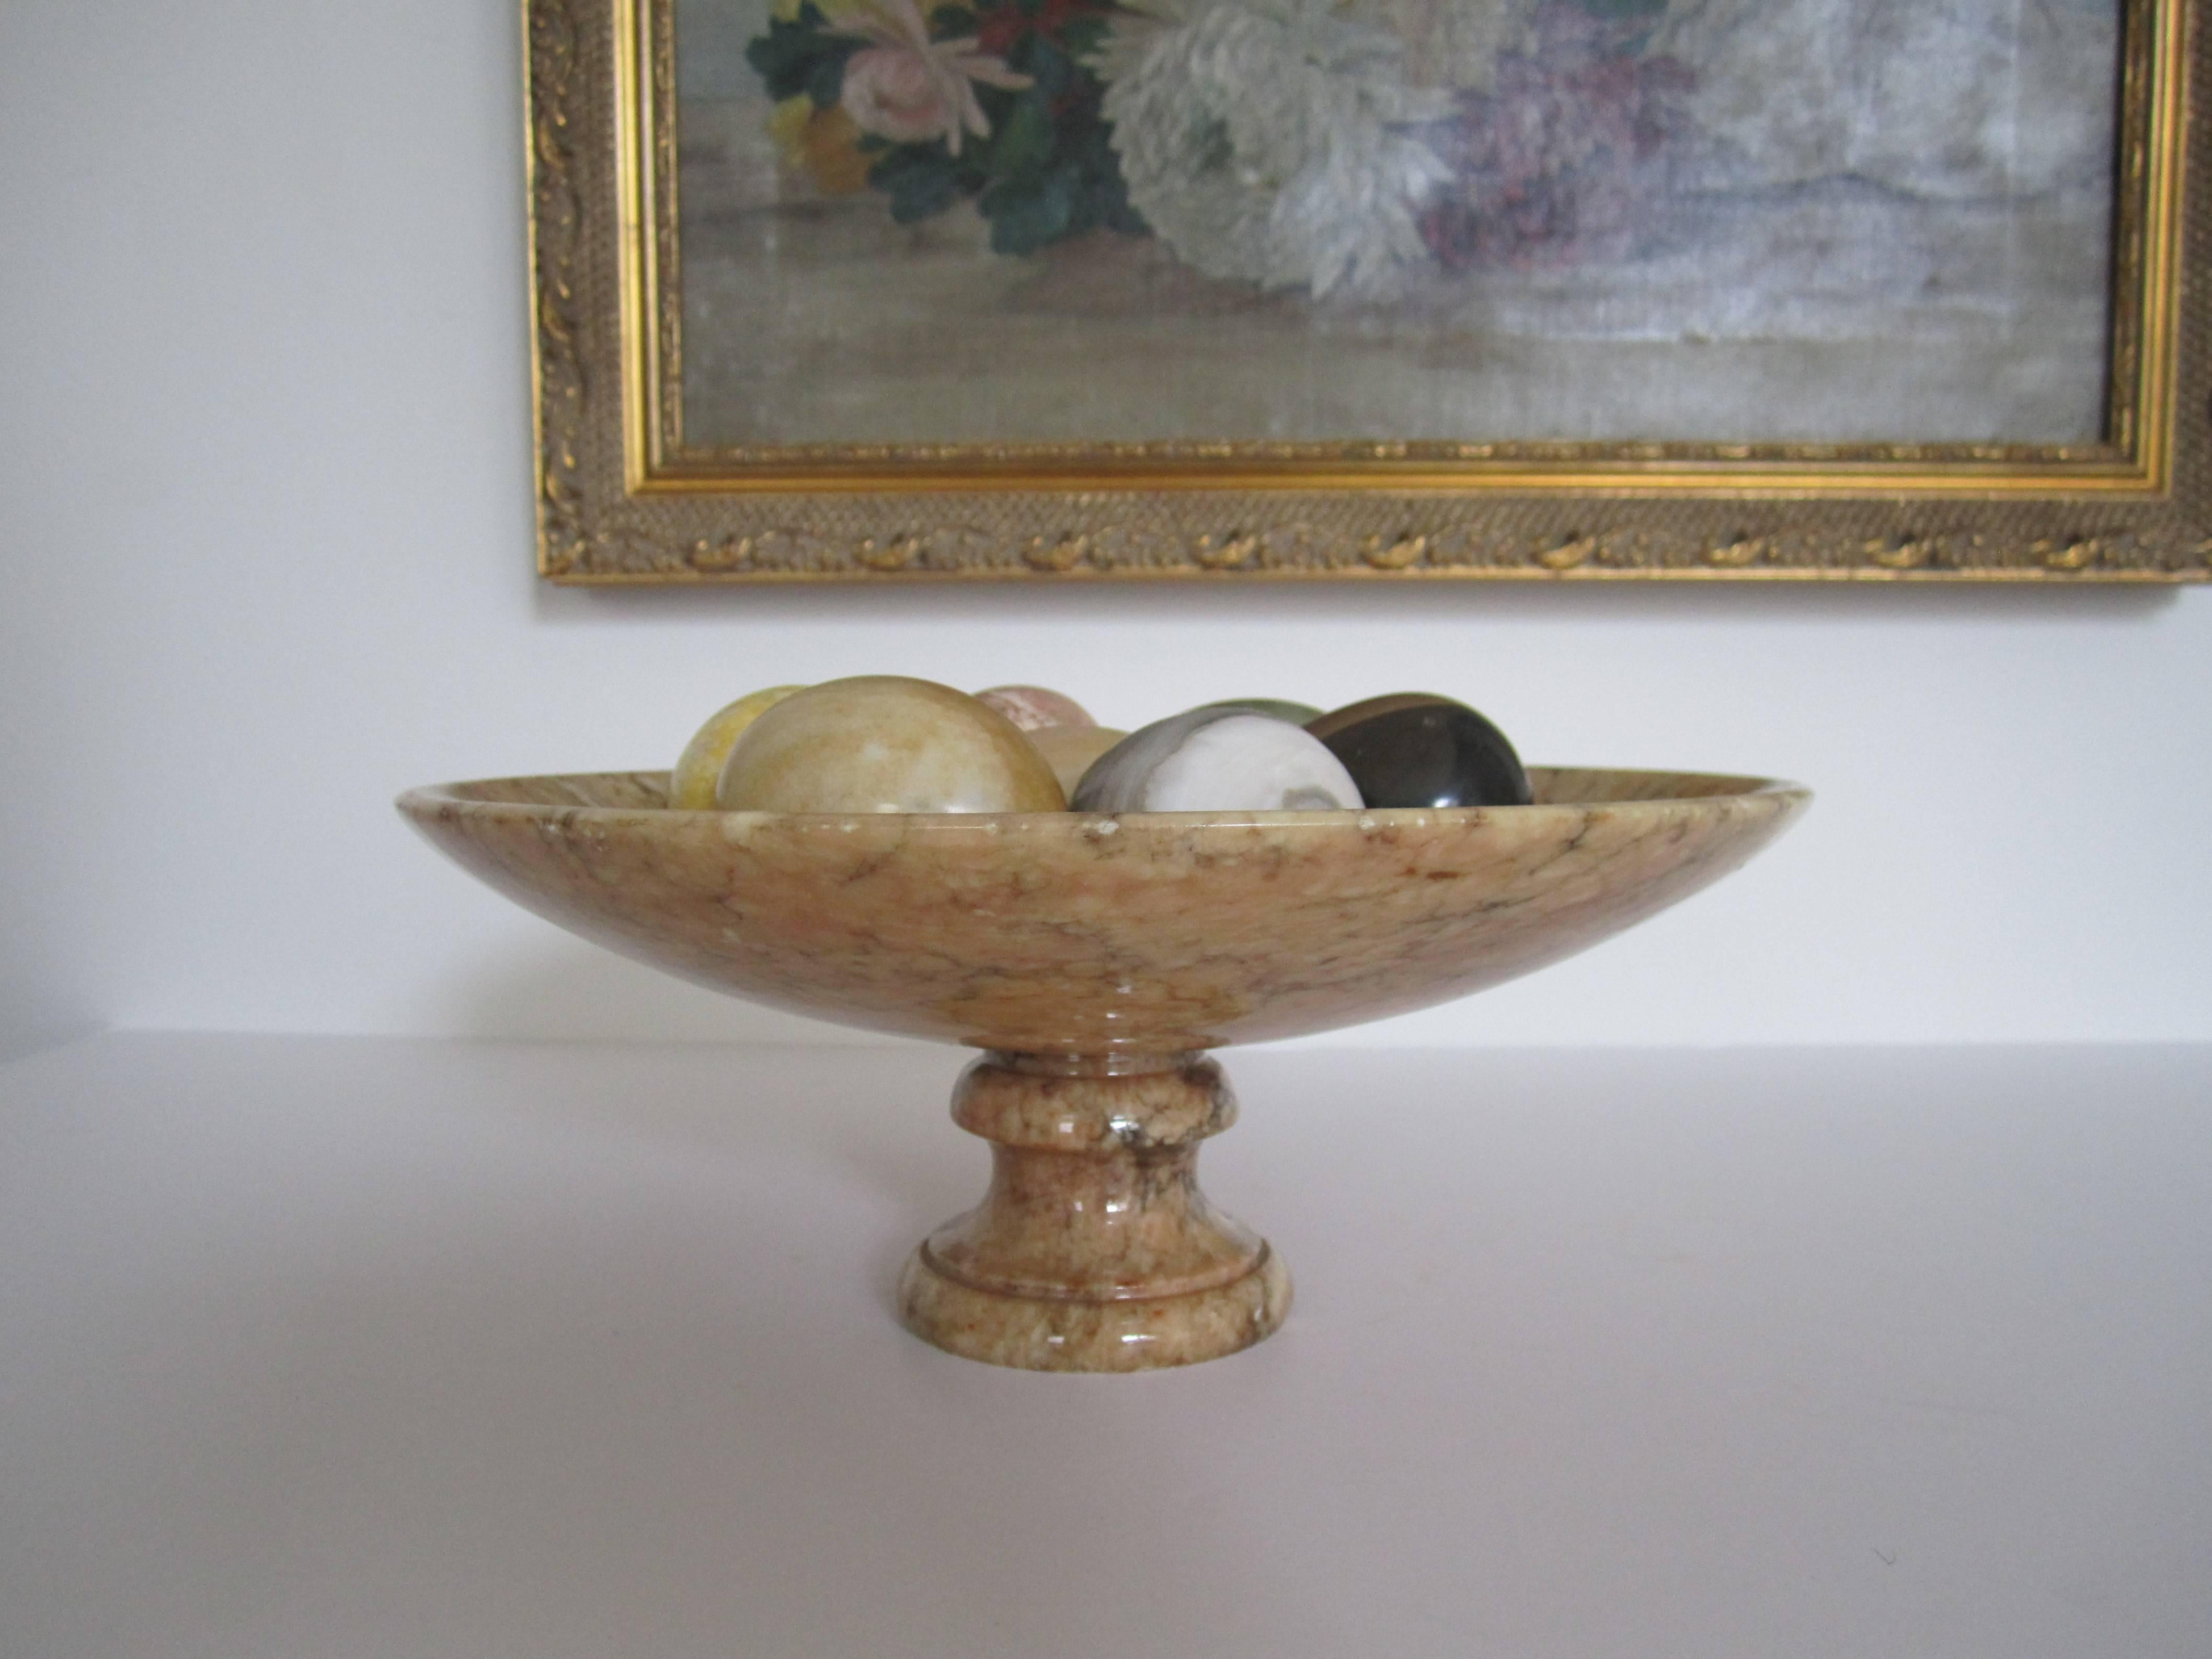 Italian Vintage Alabaster Tazza Centerpiece with Marble and Onyx Egg Sculptures